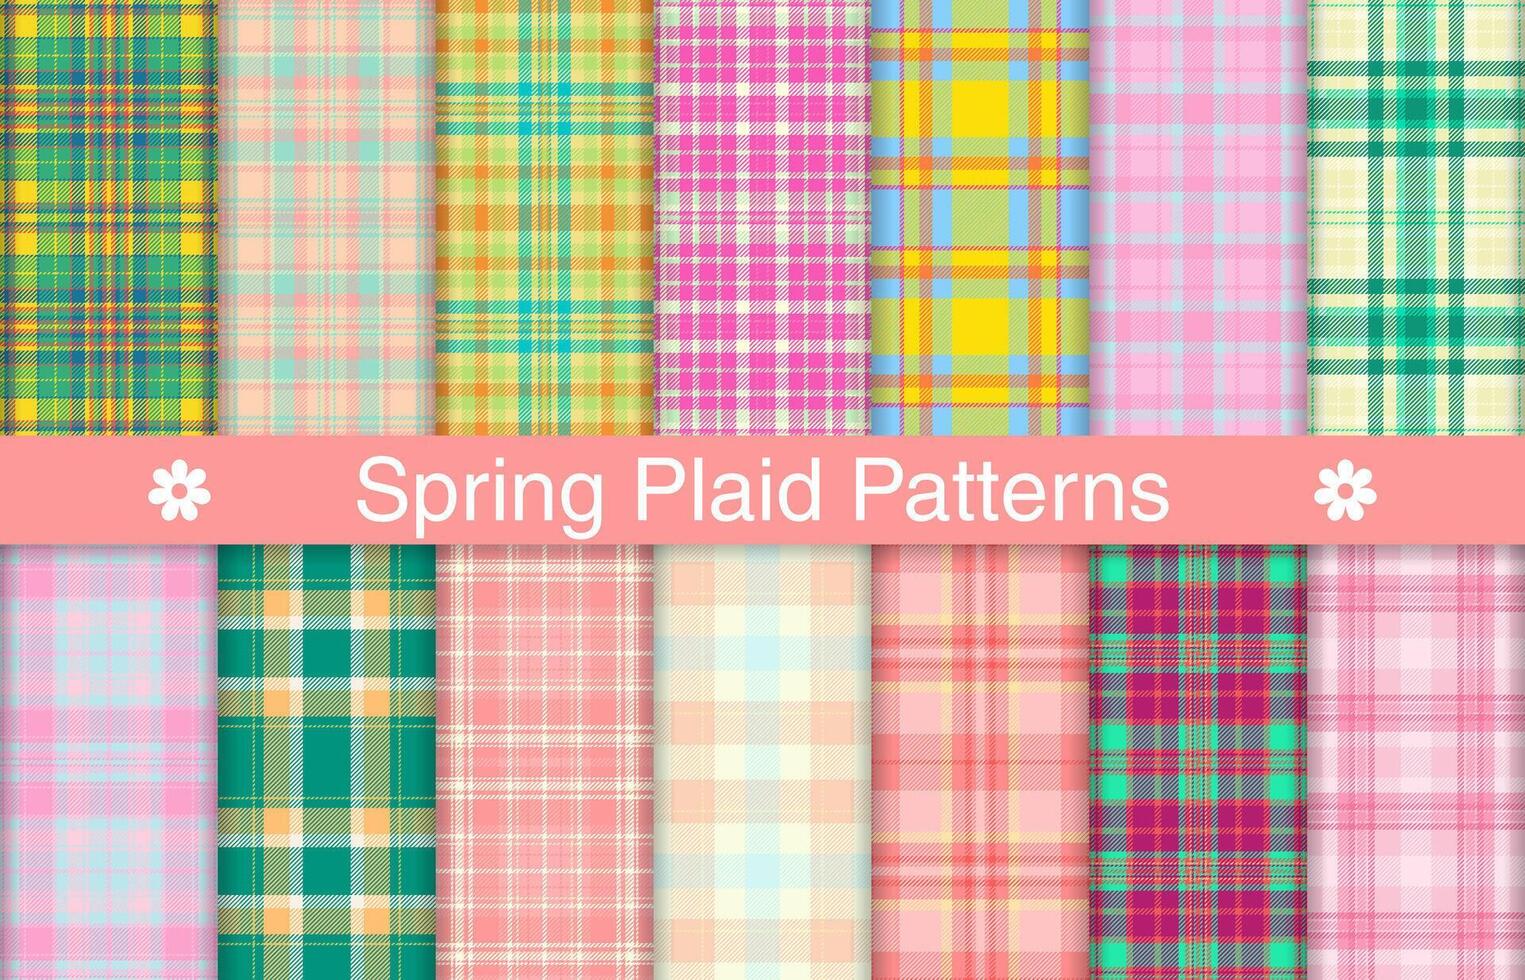 Spring plaid bundles, textile design, checkered fabric pattern for shirt, dress, suit, wrapping paper print, invitation and gift card. vector